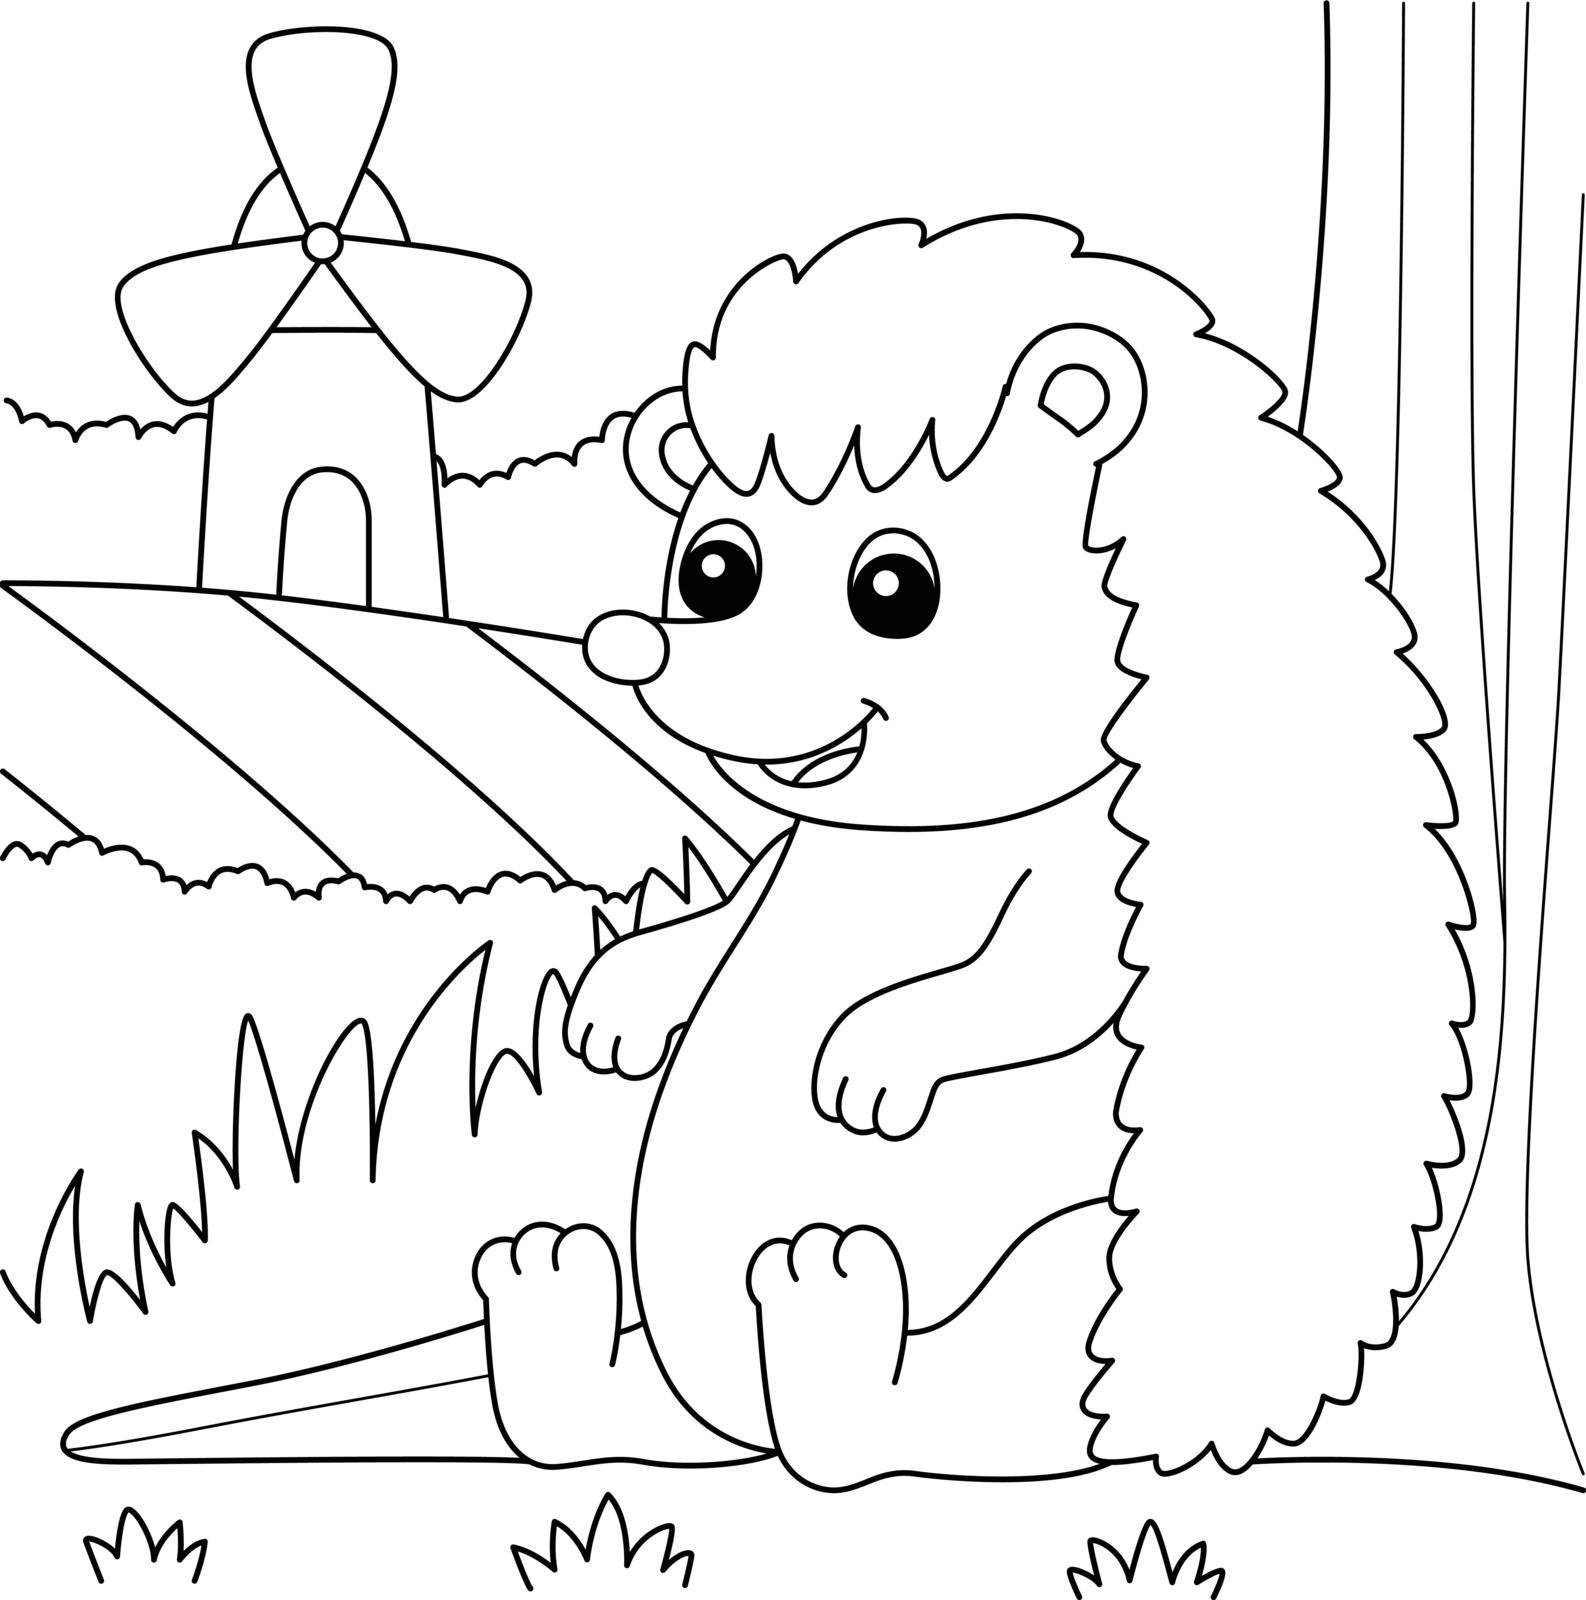 A cute and funny coloring page of a hedgehog farm animal. Provides hours of coloring fun for children. To color, this page is very easy. Suitable for little kids and toddlers.